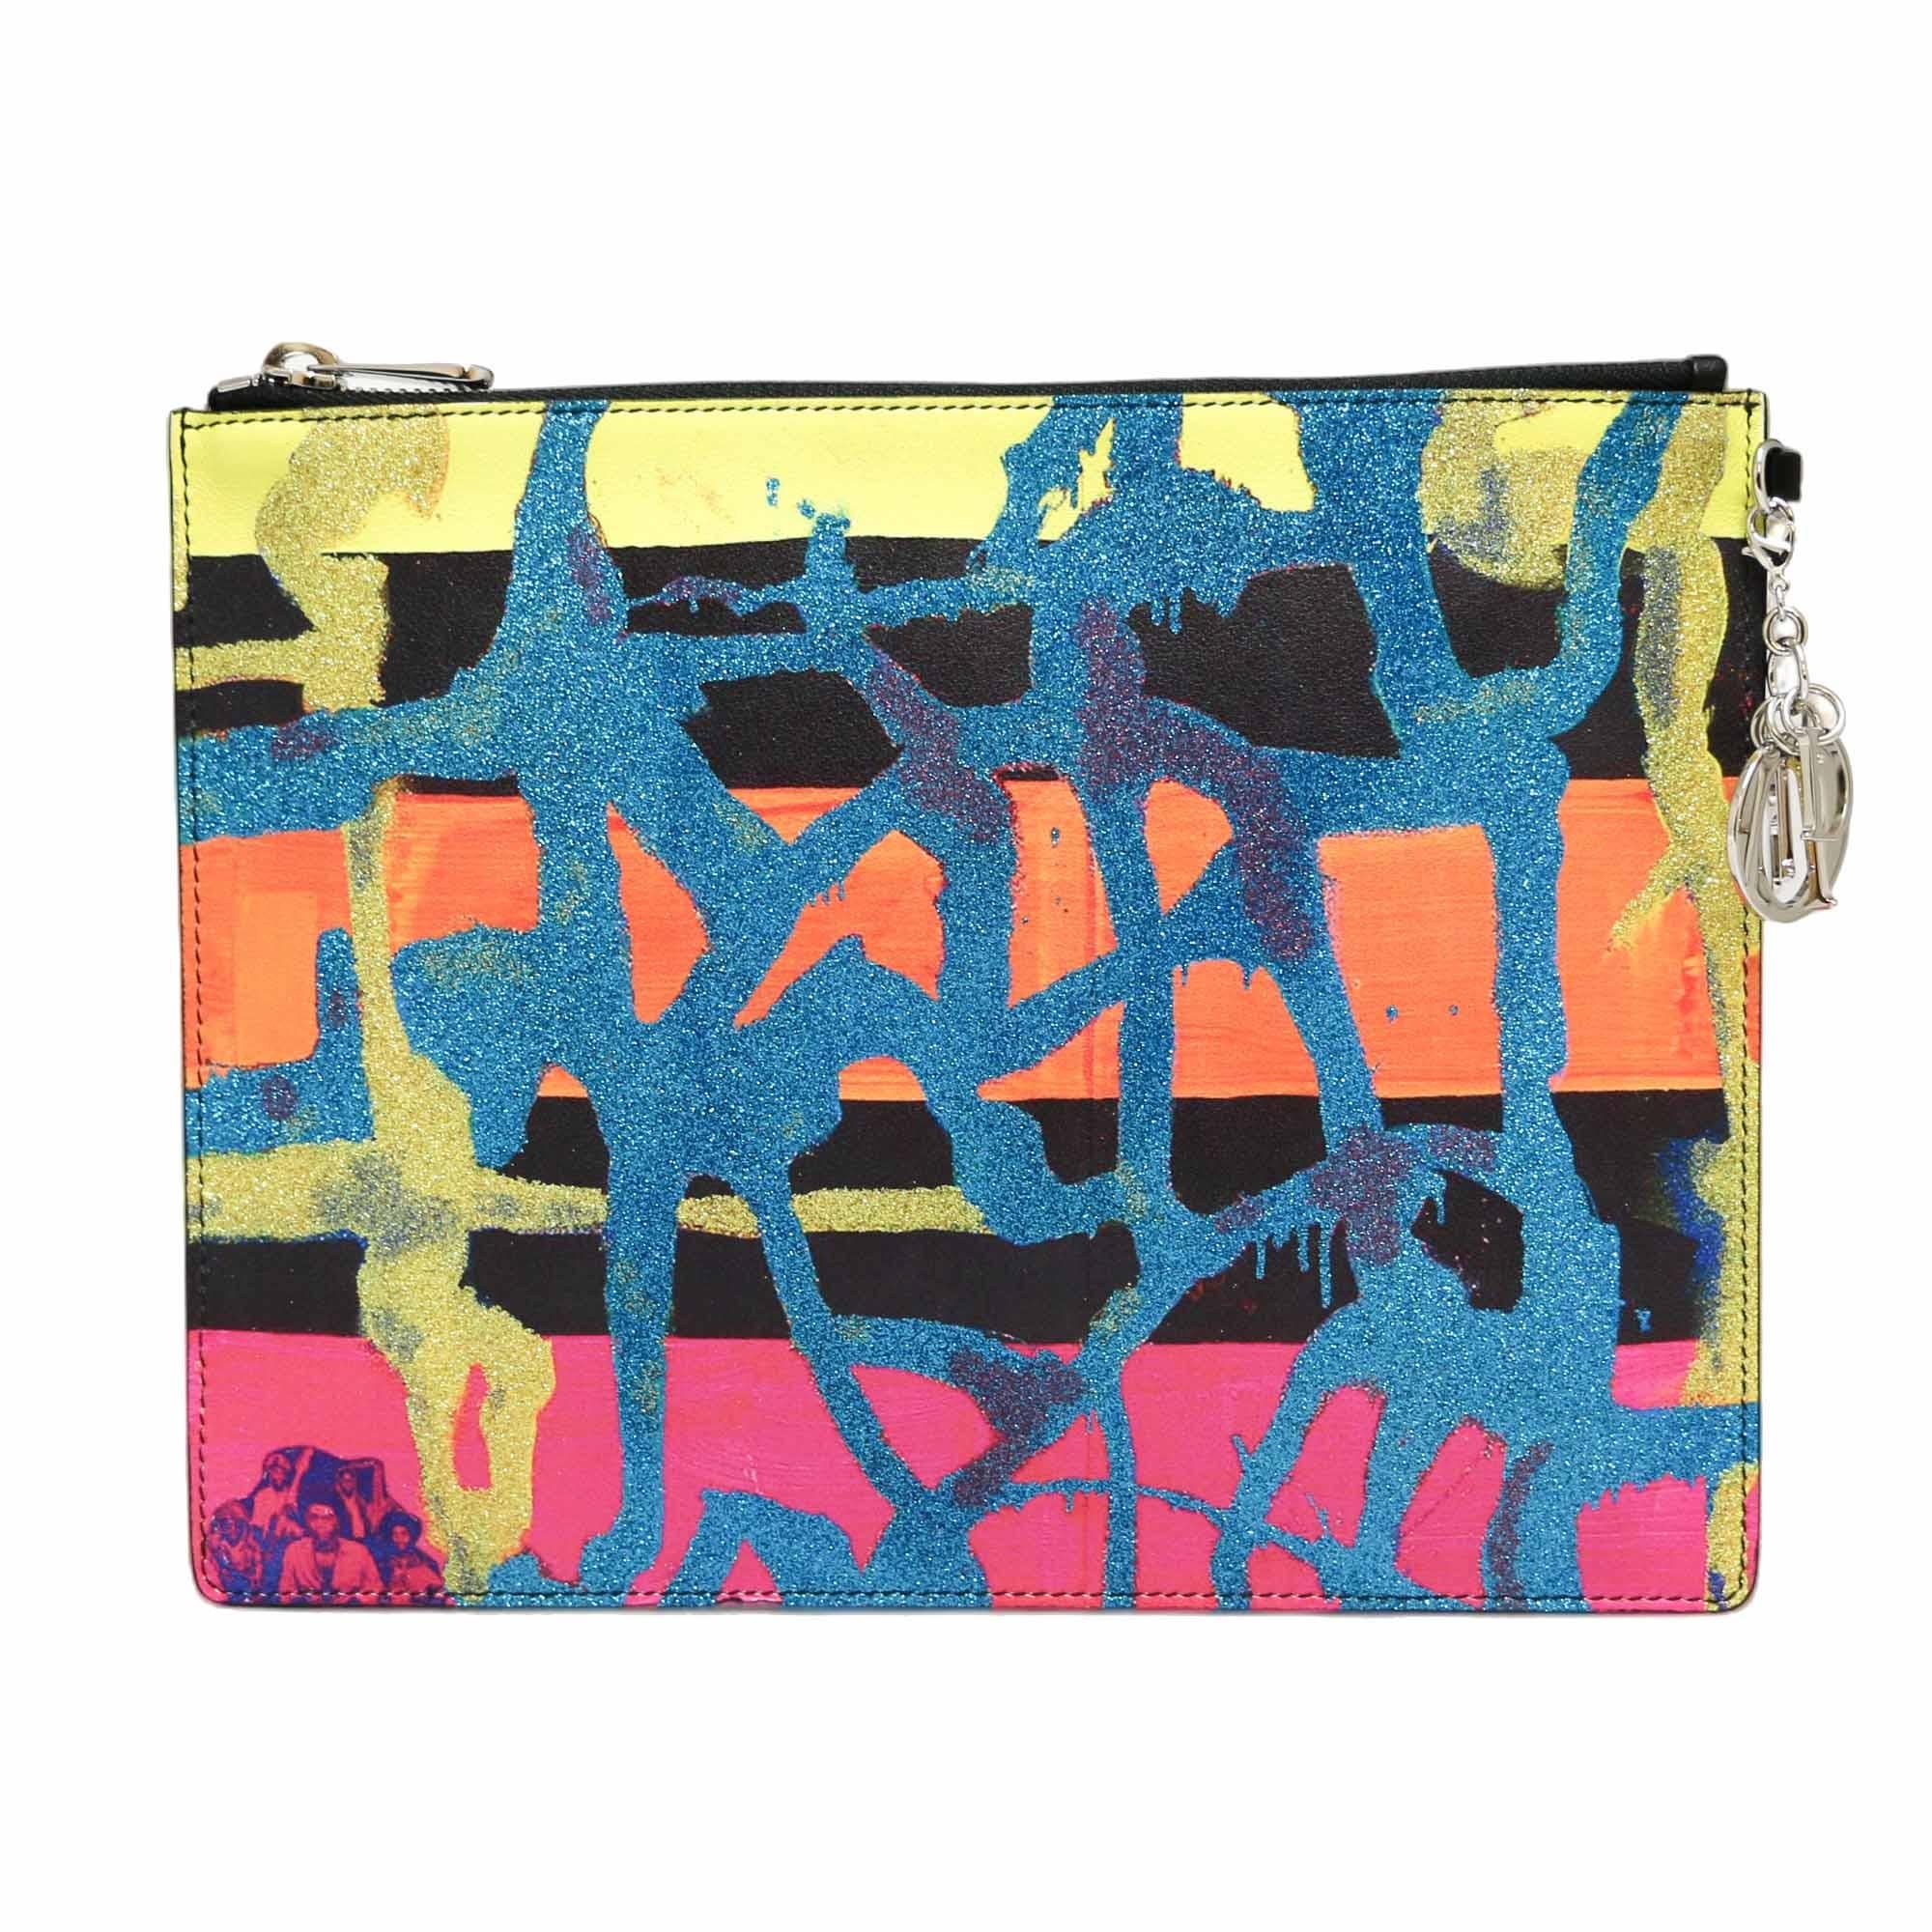 Amazing Lady DIOR clutch in collaboration with the contemporary artist Chris Martin 
Condition: very good
Made in Italy
Collection: Lady Dior
Material: leather, glitter
Interior: orange textile
Color: multicolor
Dimensions: 25 x 19 x 1 cm
Serial